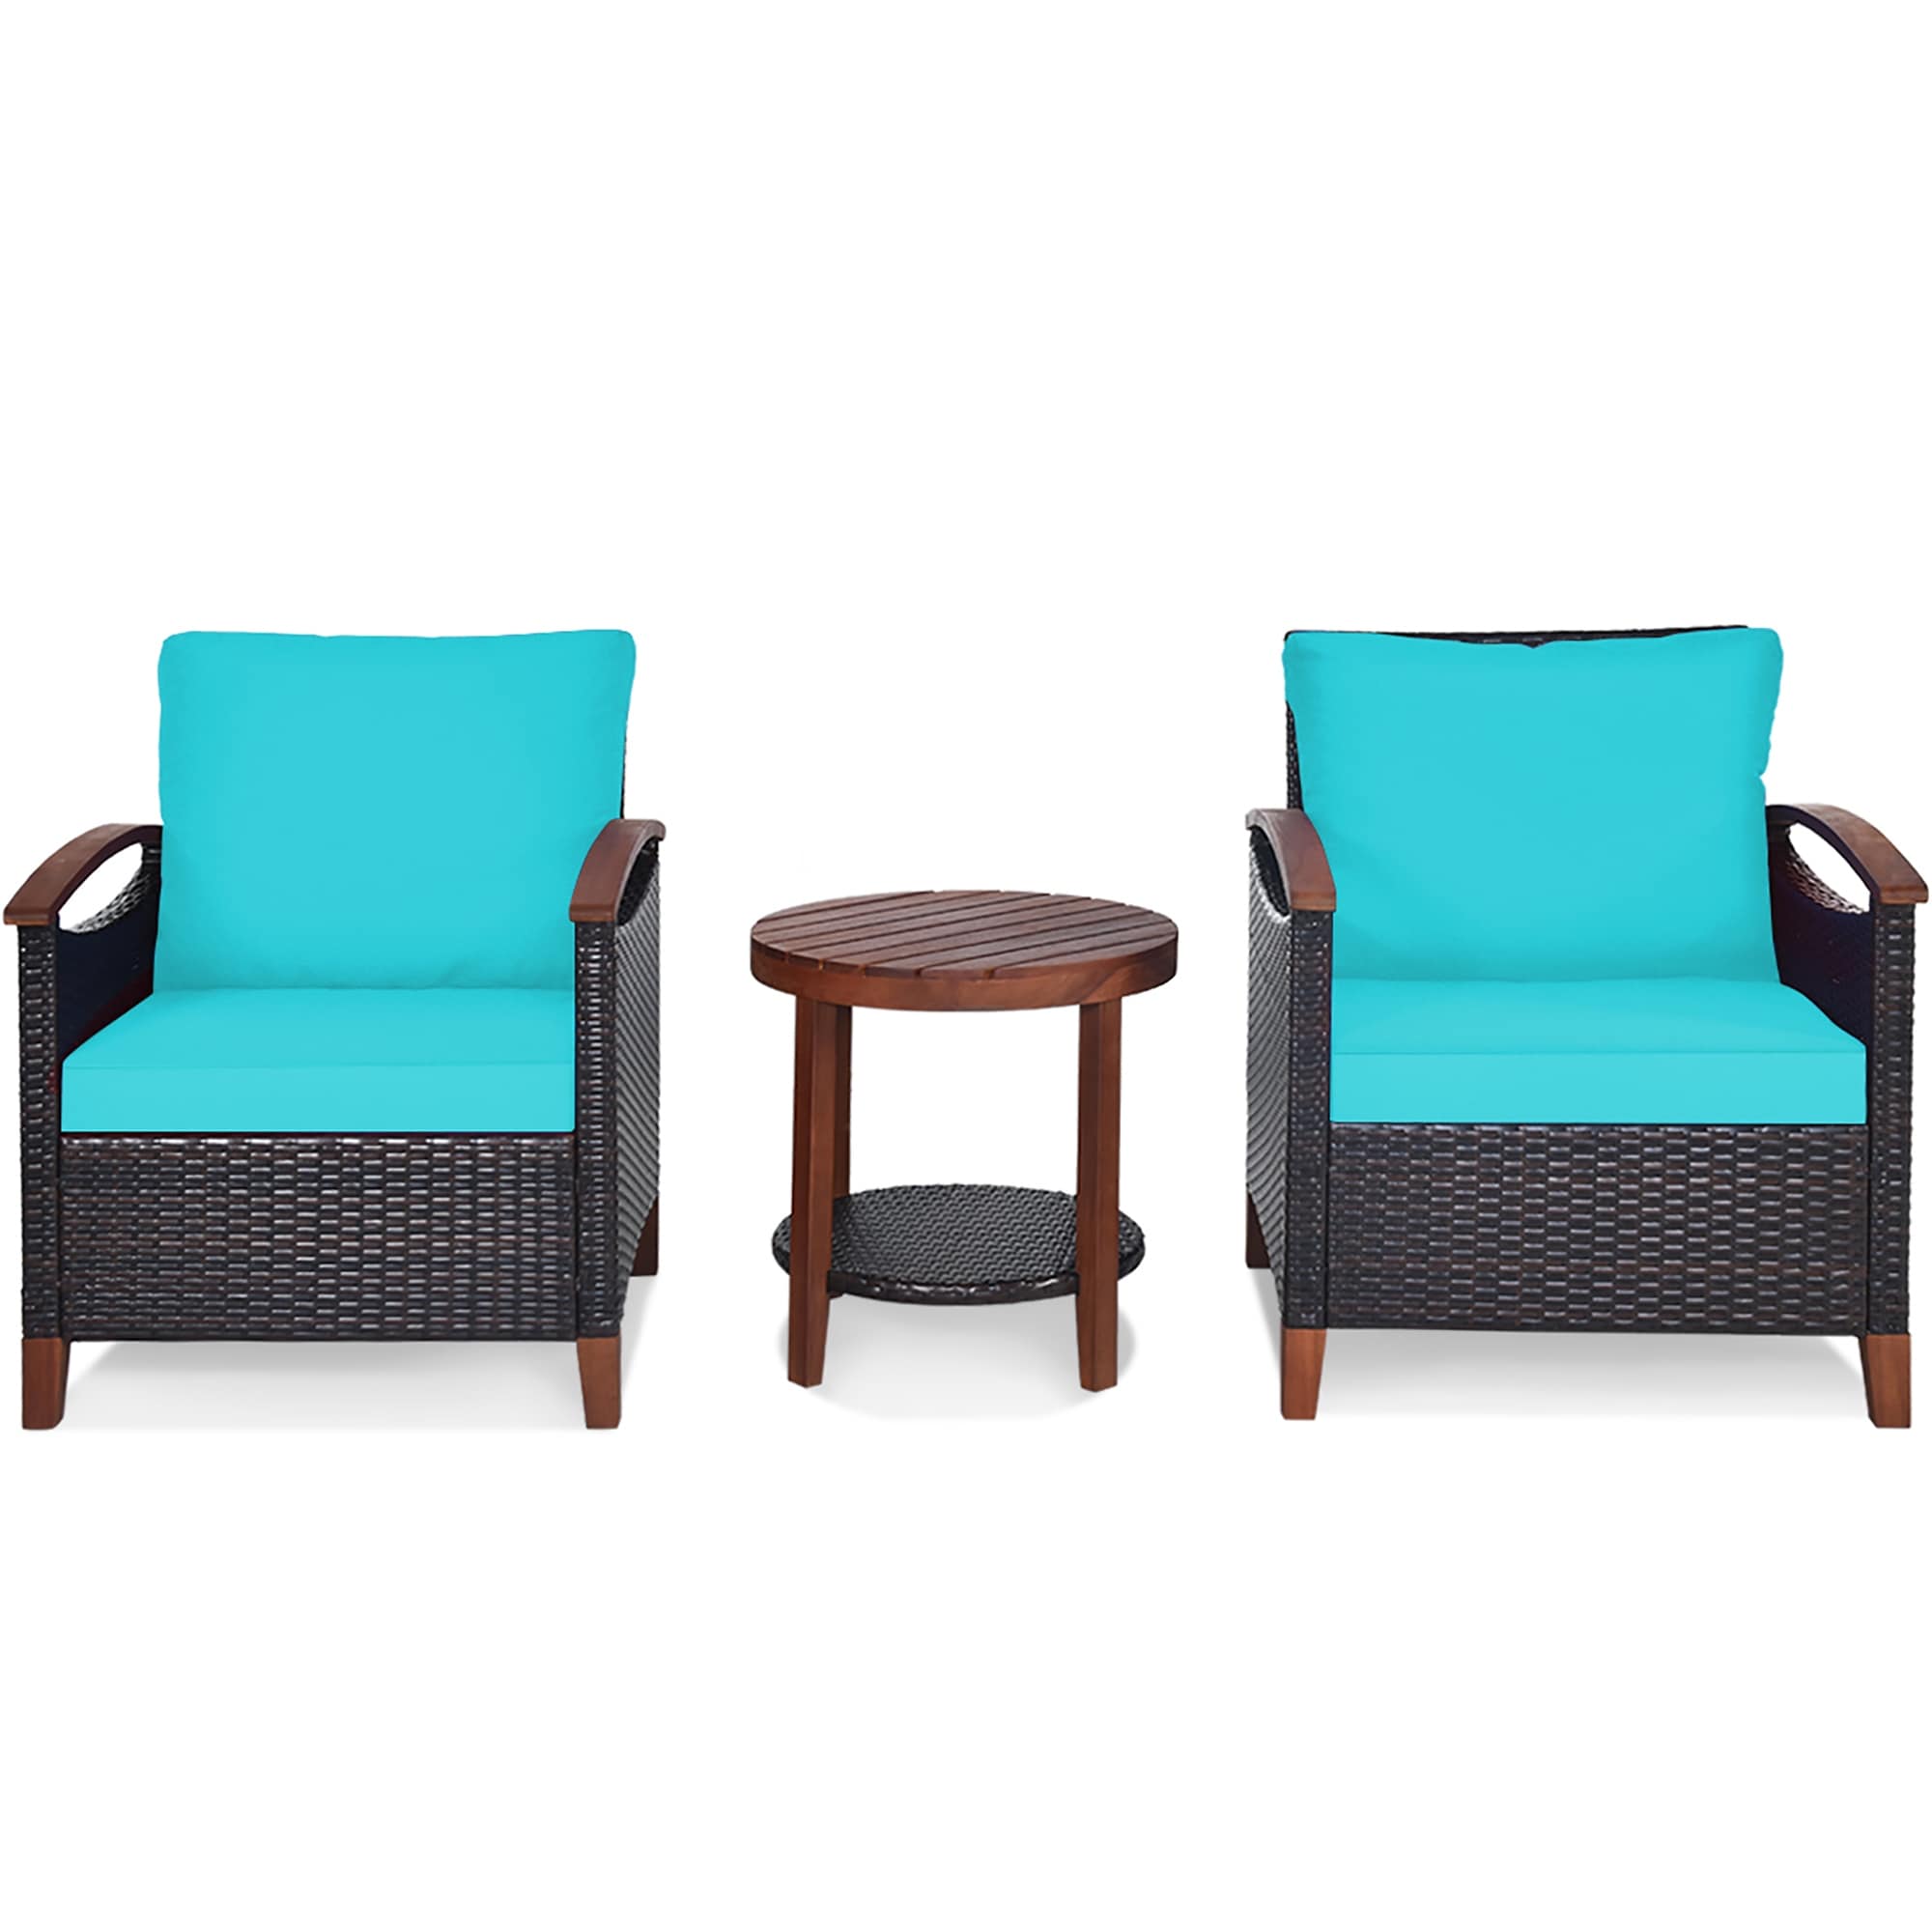 3pcs Patio Rattan Furniture Set With Cushioned Chair And Wooden Frame